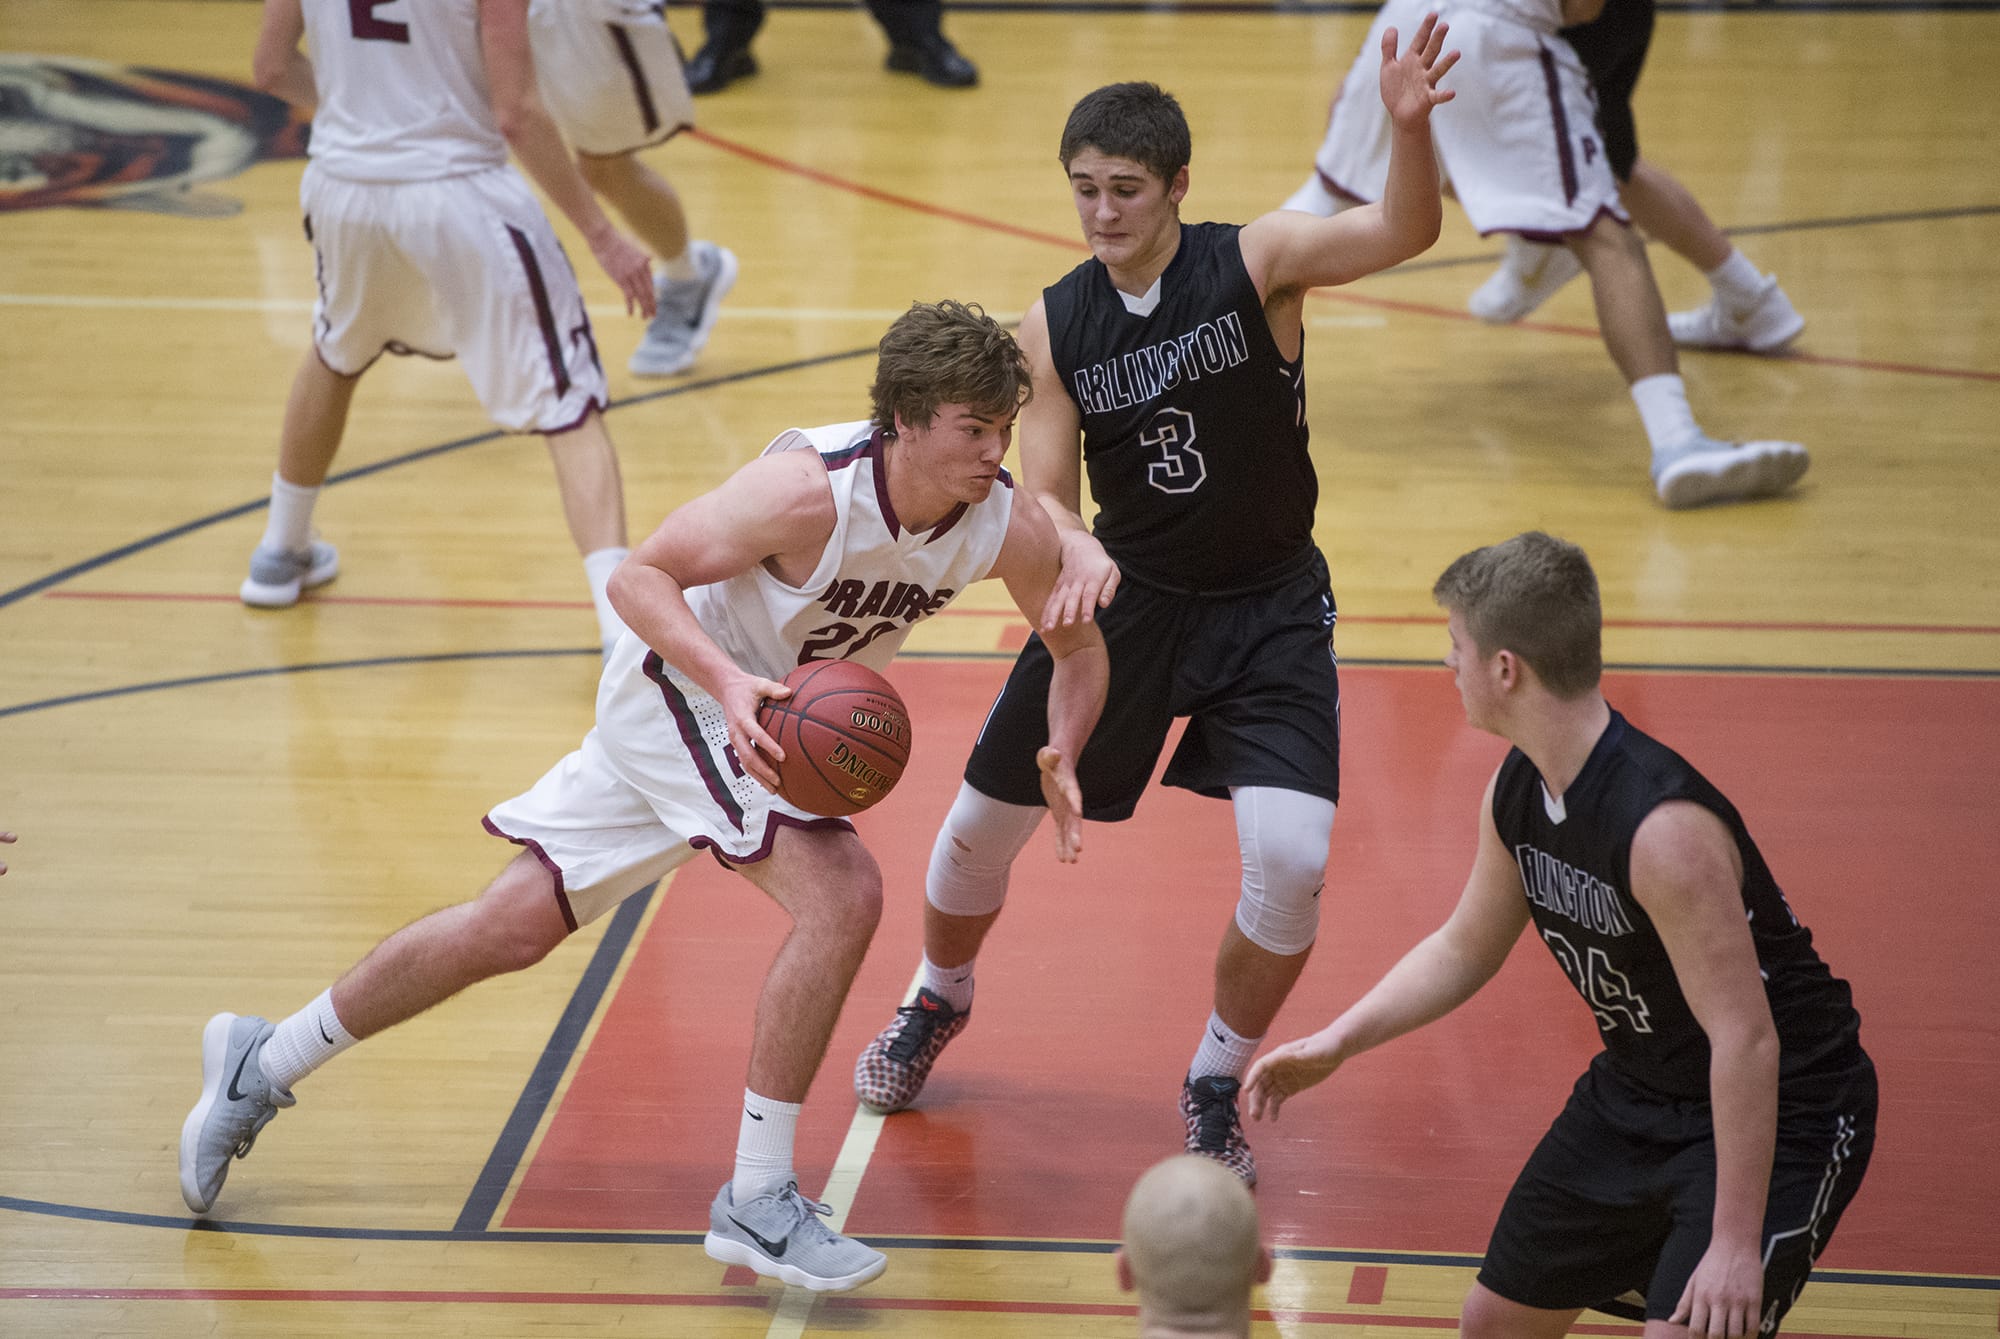 Prairie’s Logan Reed (20) pushes past Arlington’s Griffin Gardoski (3) and Joseph Schmidt (24) during the 3A regional boys basketball game at Battle Ground High School, Saturday February 24, 2018.